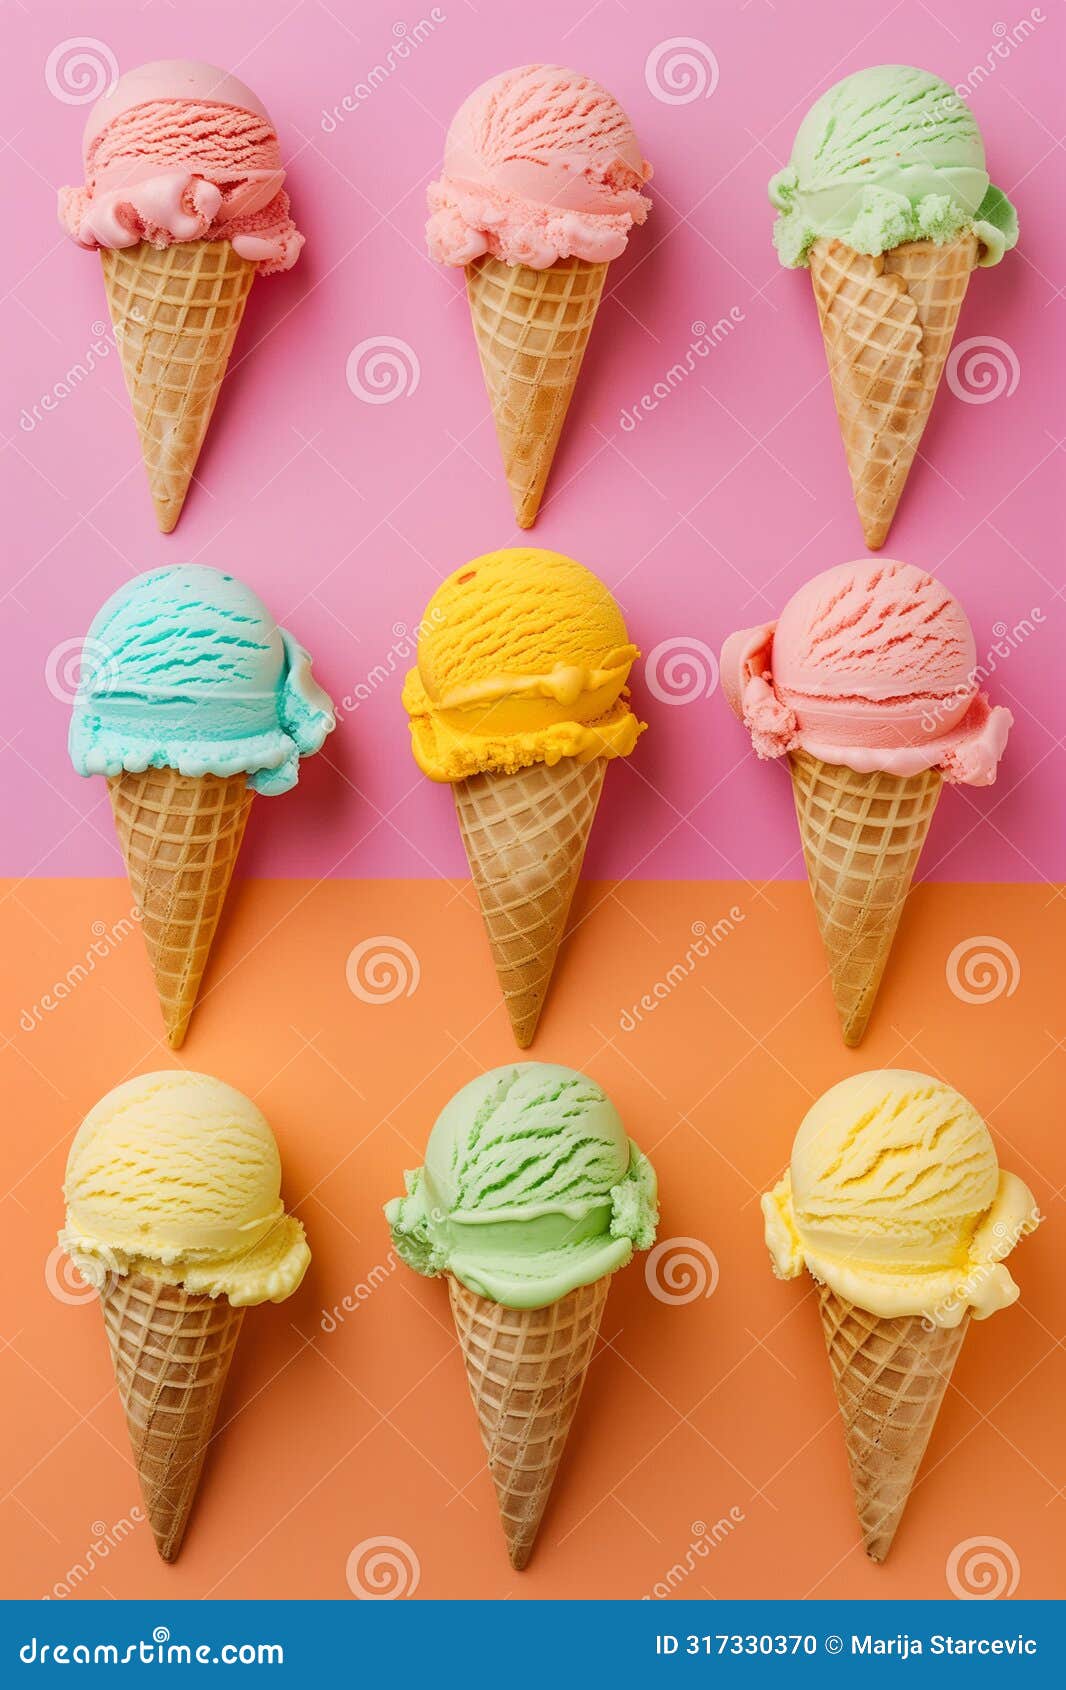 variety of ice cream cones with differenc flavours and colors